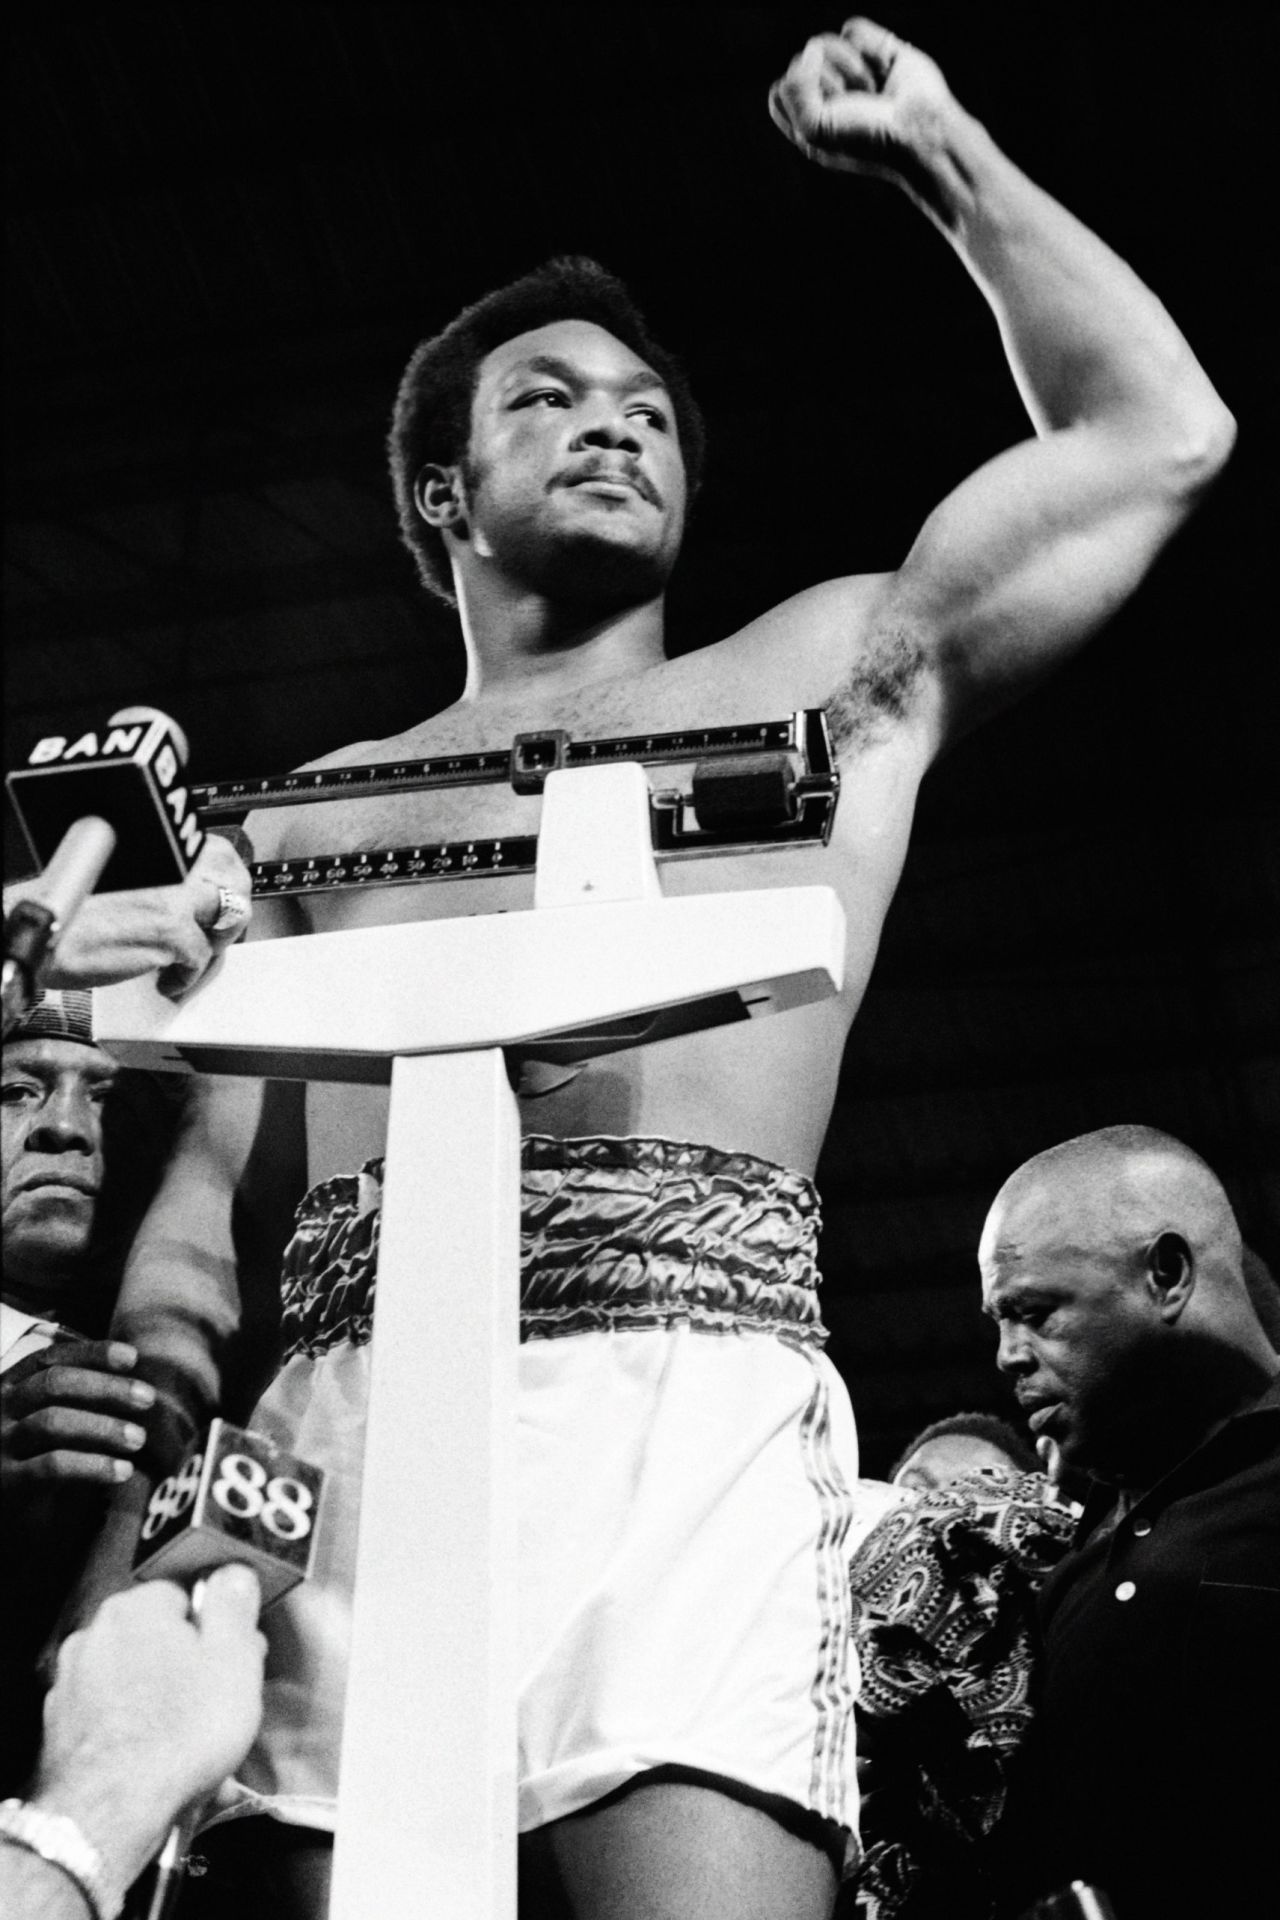 The weigh-in for the hotly anticipated bout took place on October 29, 1974. "Big George" Foreman came in at 220 pounds, while the challenger Ali, who at the age of 32 was giving away seven years to his opponent, weighed in at 216. Foreman was the favorite for the fight, with Ali's business manager Gene Kilroy concerned about how he could deal with his friend should the worst happen. "My biggest fear was, suppose Ali got hurt. How good are the hospitals in Zaire? What would we have to do? Go on an aeroplane and get to Paris," Kilroy told British newspaper The Daily Telegraph. "I discussed this with Ali and he said: 'Don't worry about me, worry about George.' "